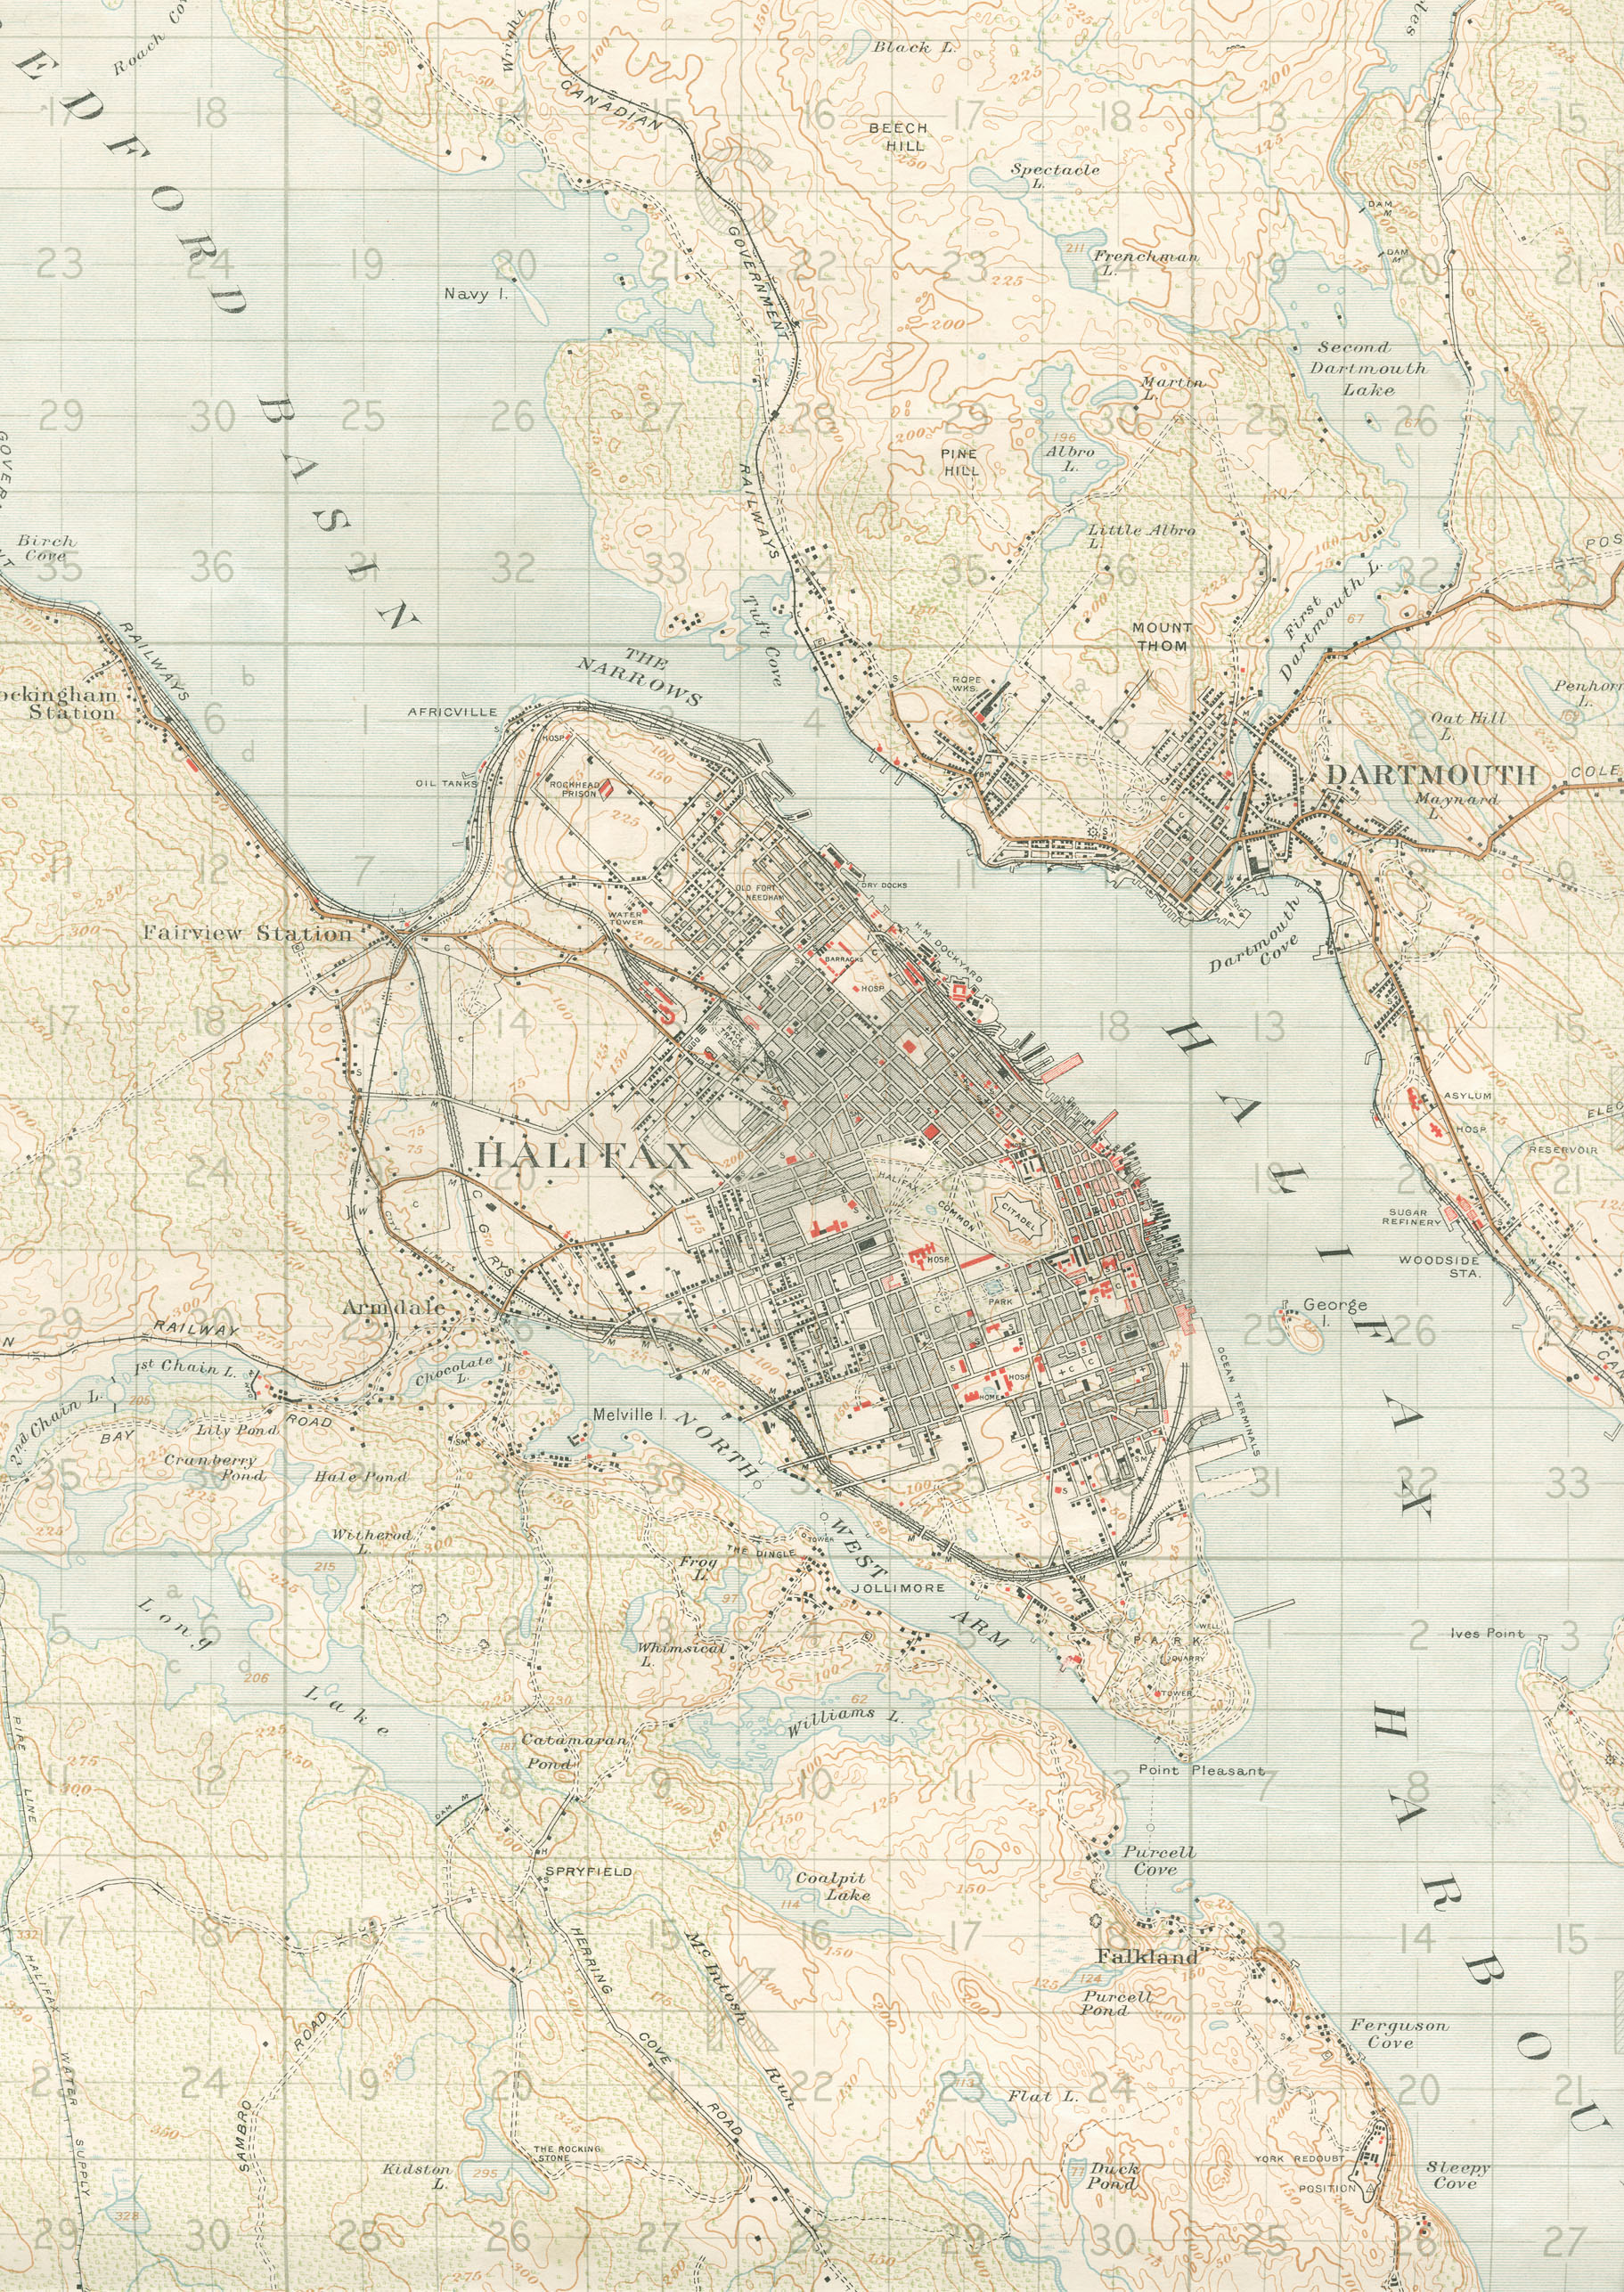 Although this map was published in 1918, it shows metropolitan Halifax prior to the Explosion.